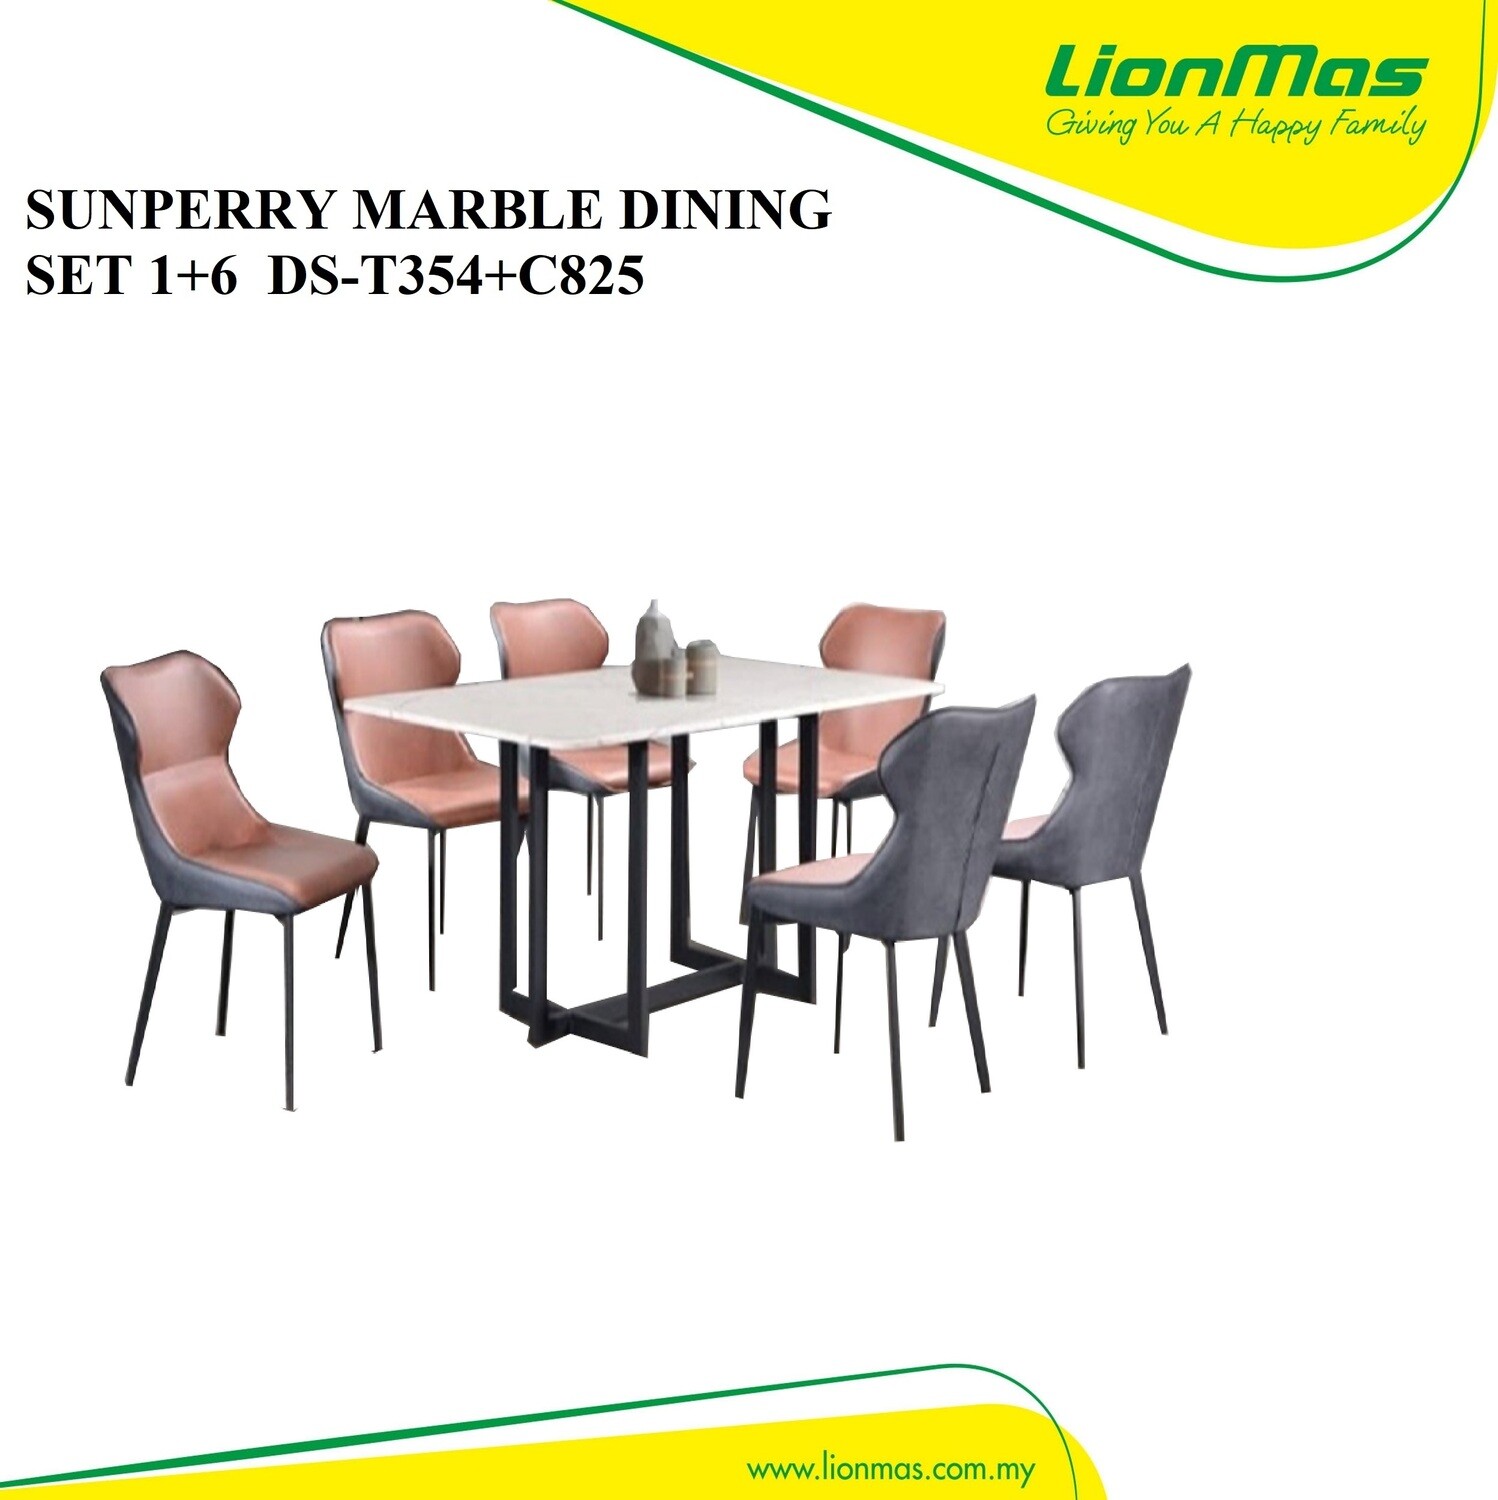 SUNPERRY MARBLE DINING SET 1+6 DS-T354+C825